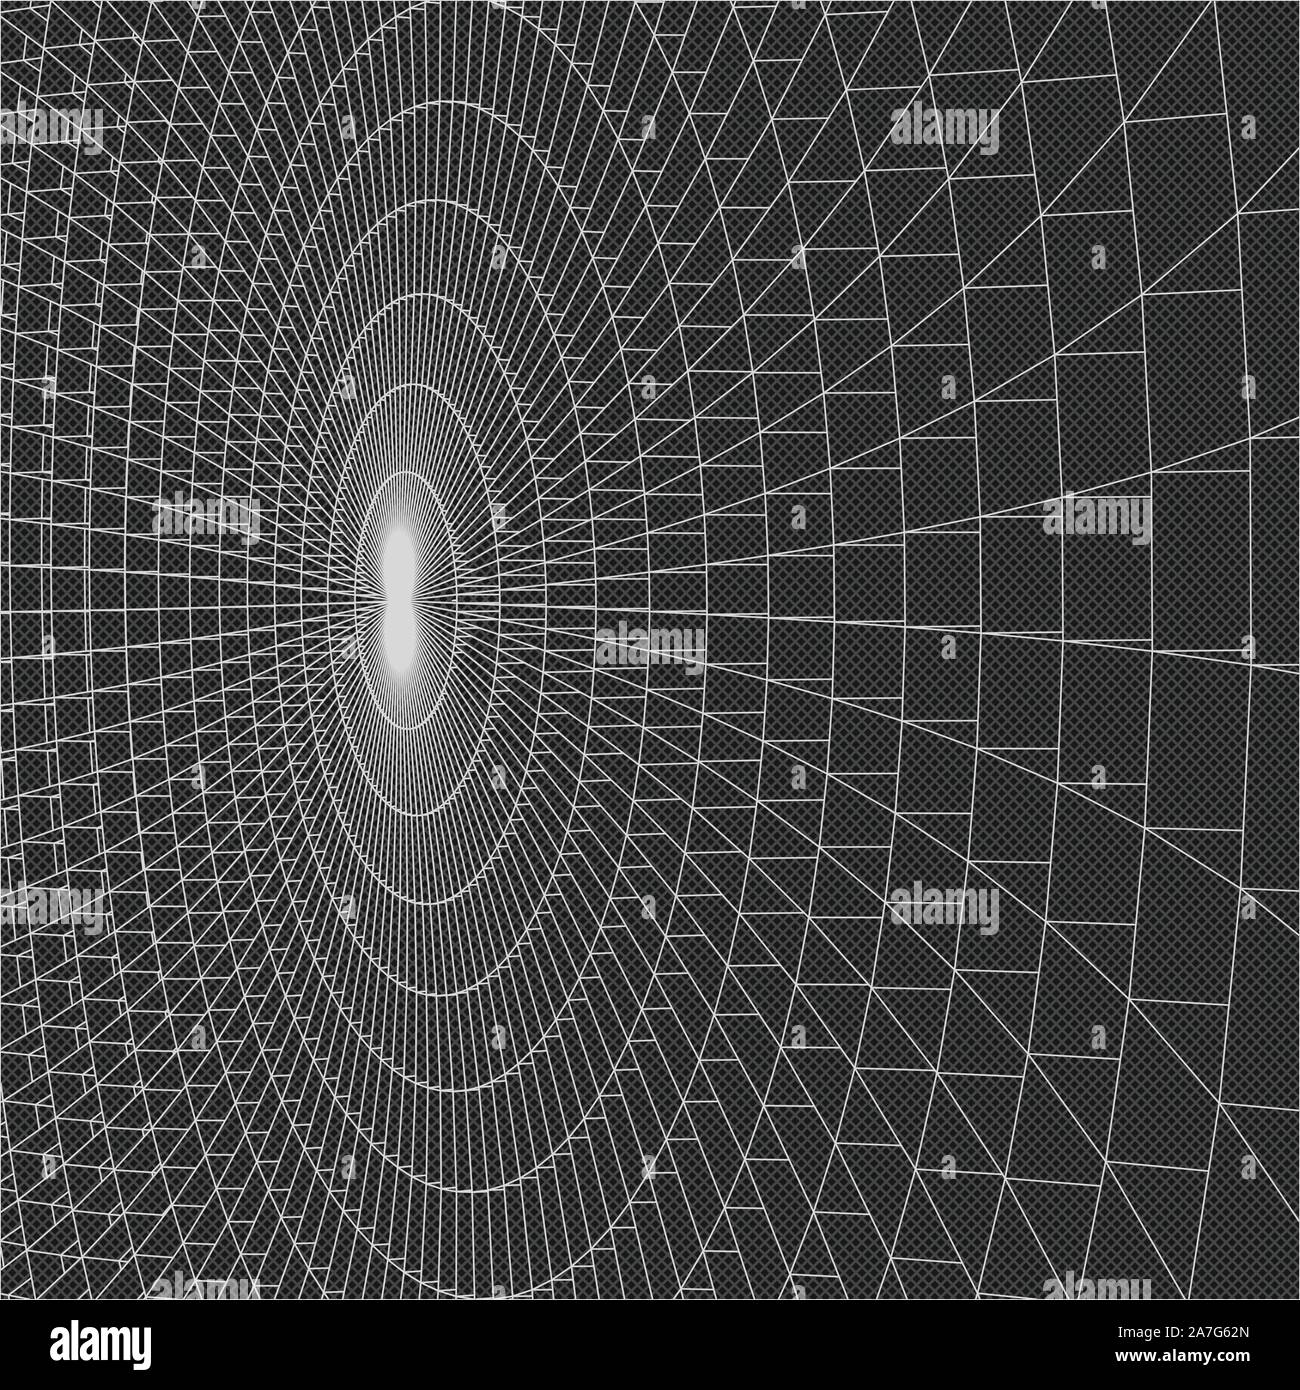 Abstract vector landscape background. Cyberspace grid. 3d technology illustration. Stock Vector